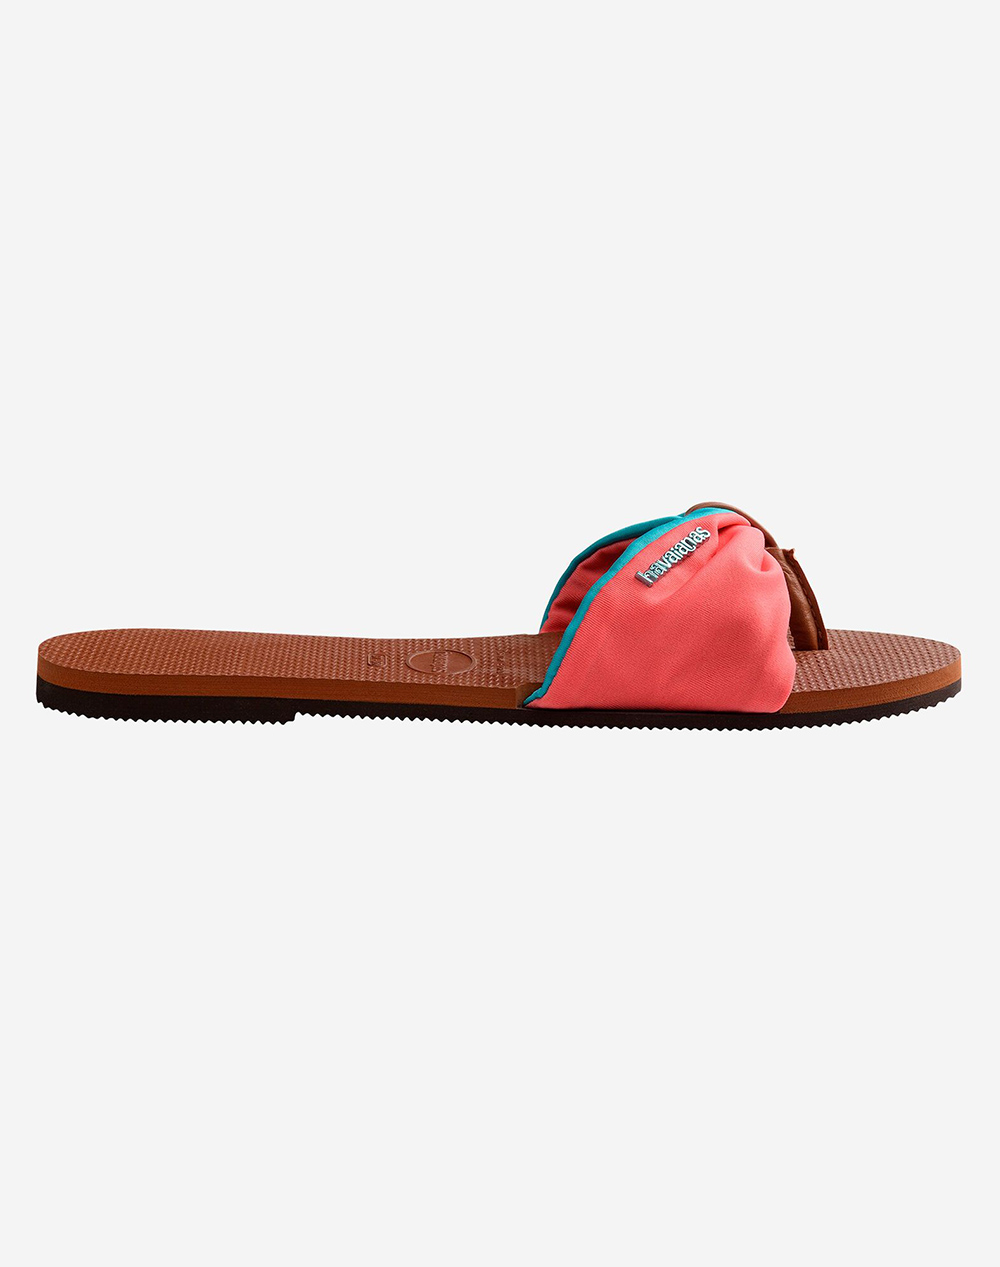 HAVAIANAS YOU ST TROPEZ COLOR ΣΑΓΙΟΝΑΡΕΣ 4146928-1976 Brown